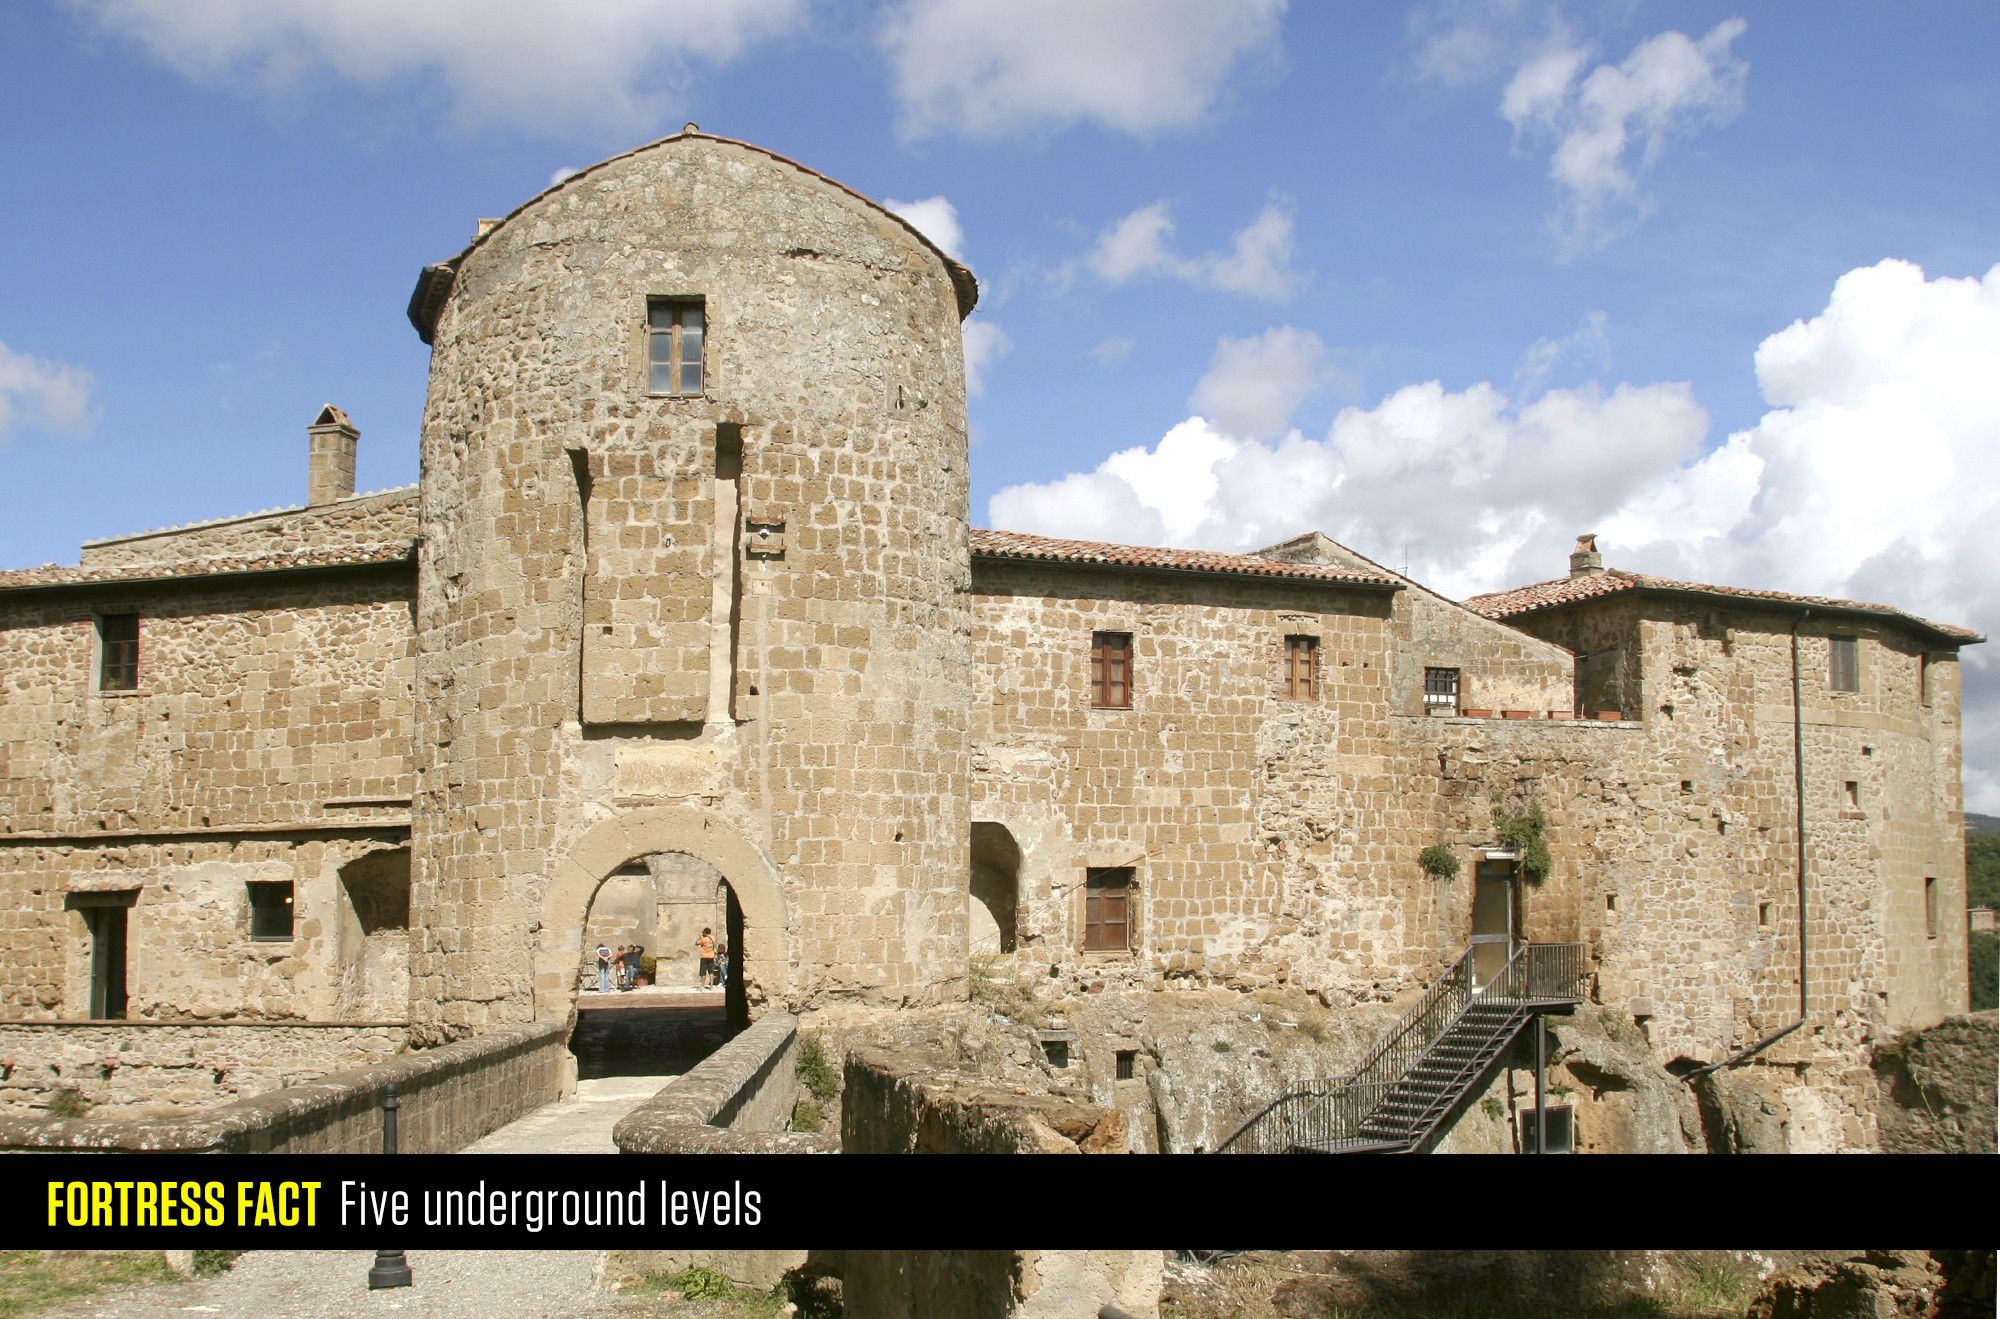 Twelve More Forts and Castles from Around the World